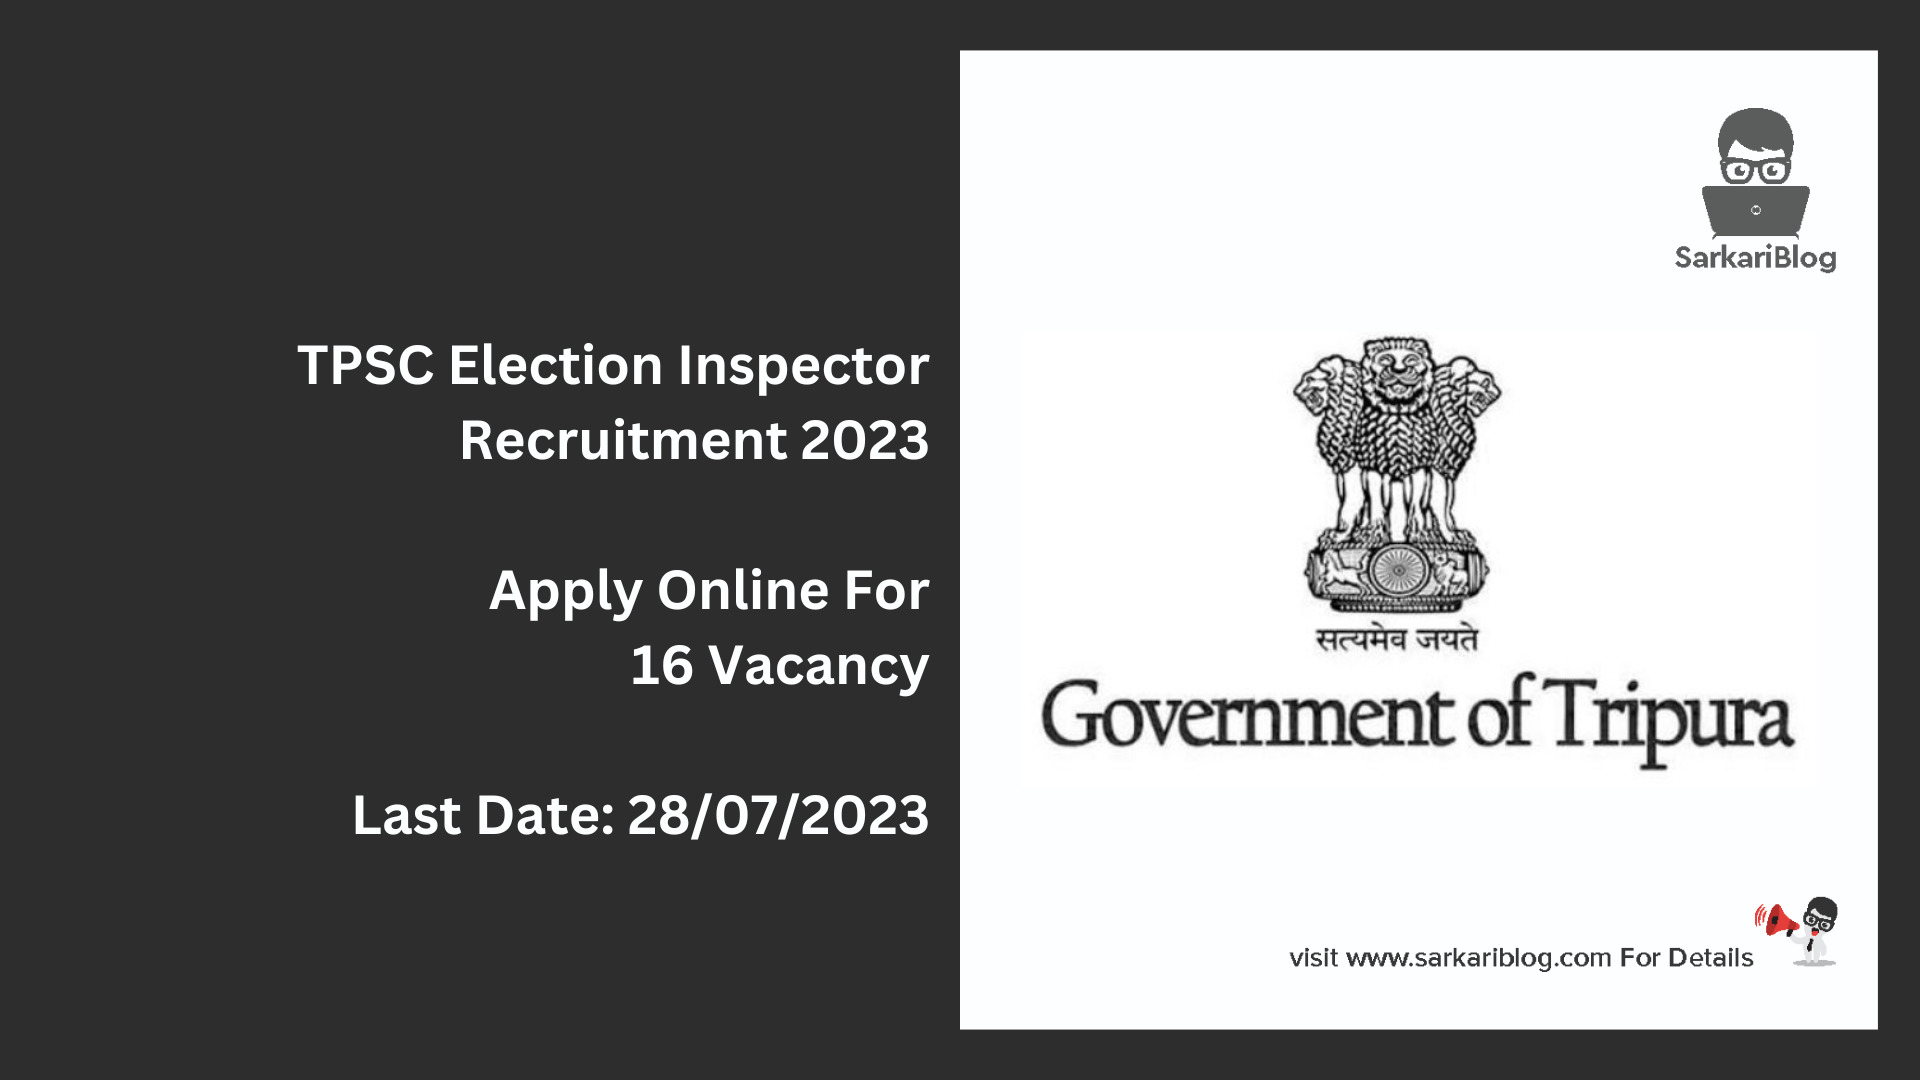 TPSC Election Inspector Recruitment 2023